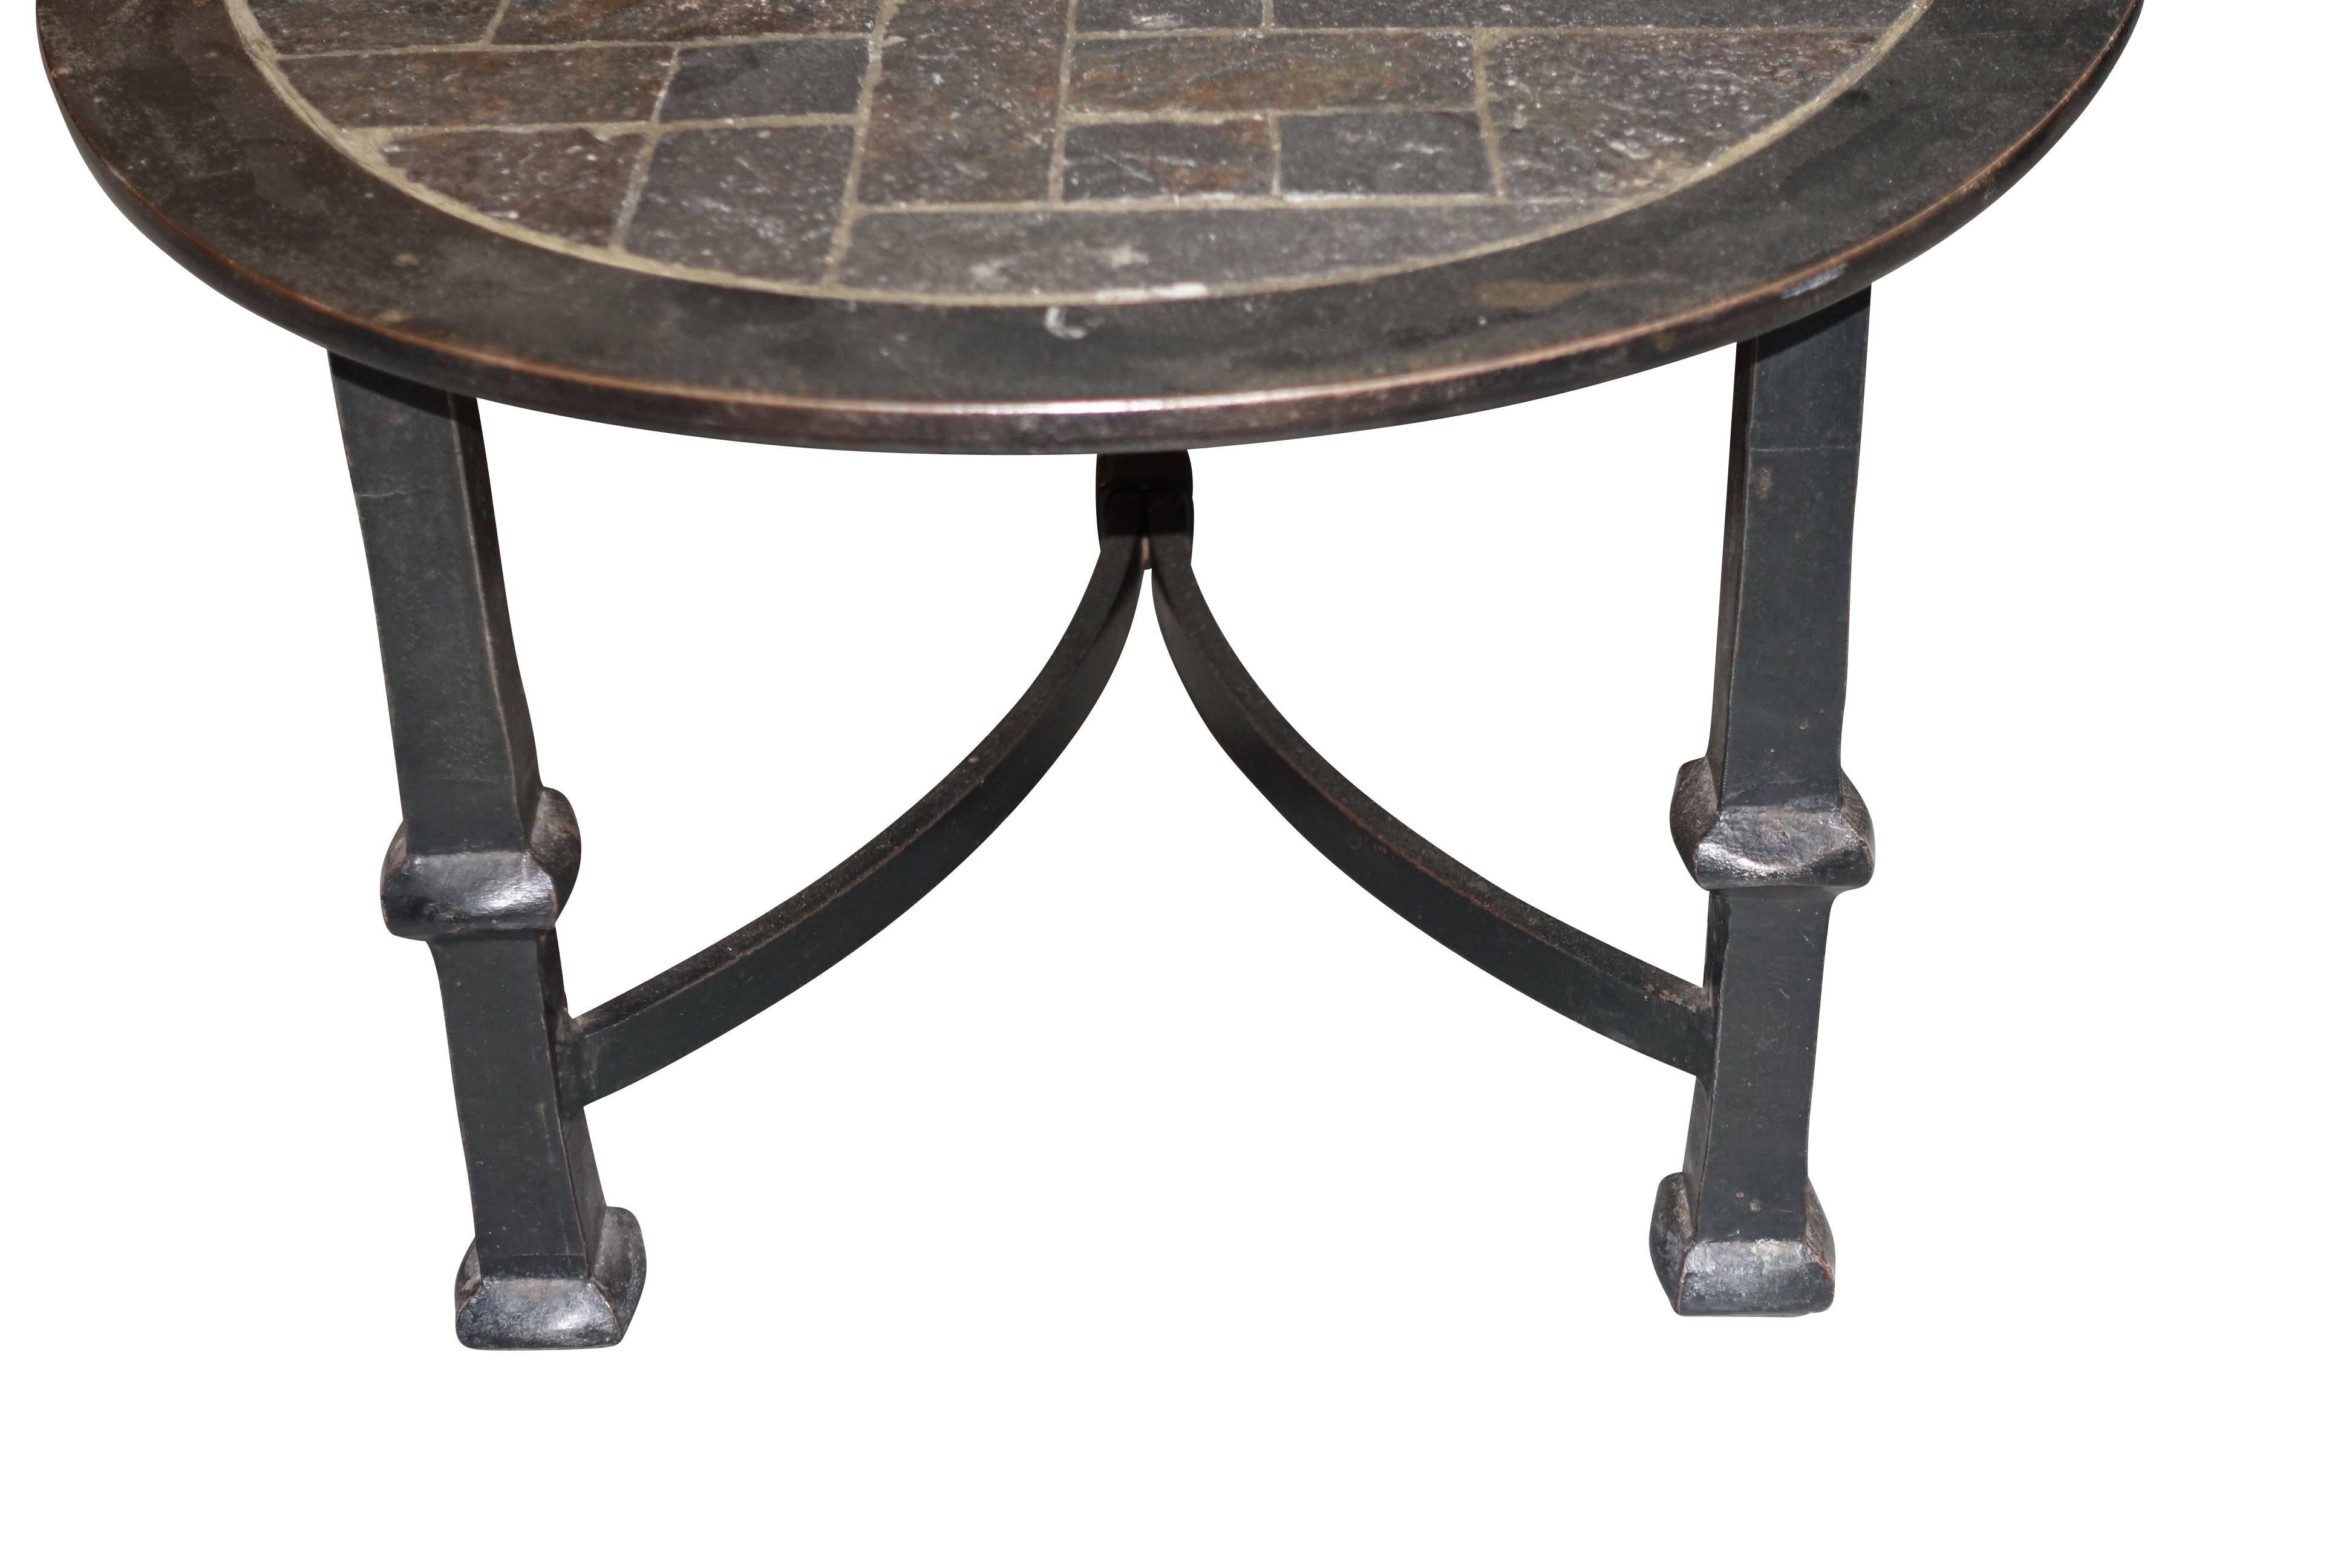 Mid-Century French stone inlaid oval top in steel frame with steel base.
Very durable and sturdy.
